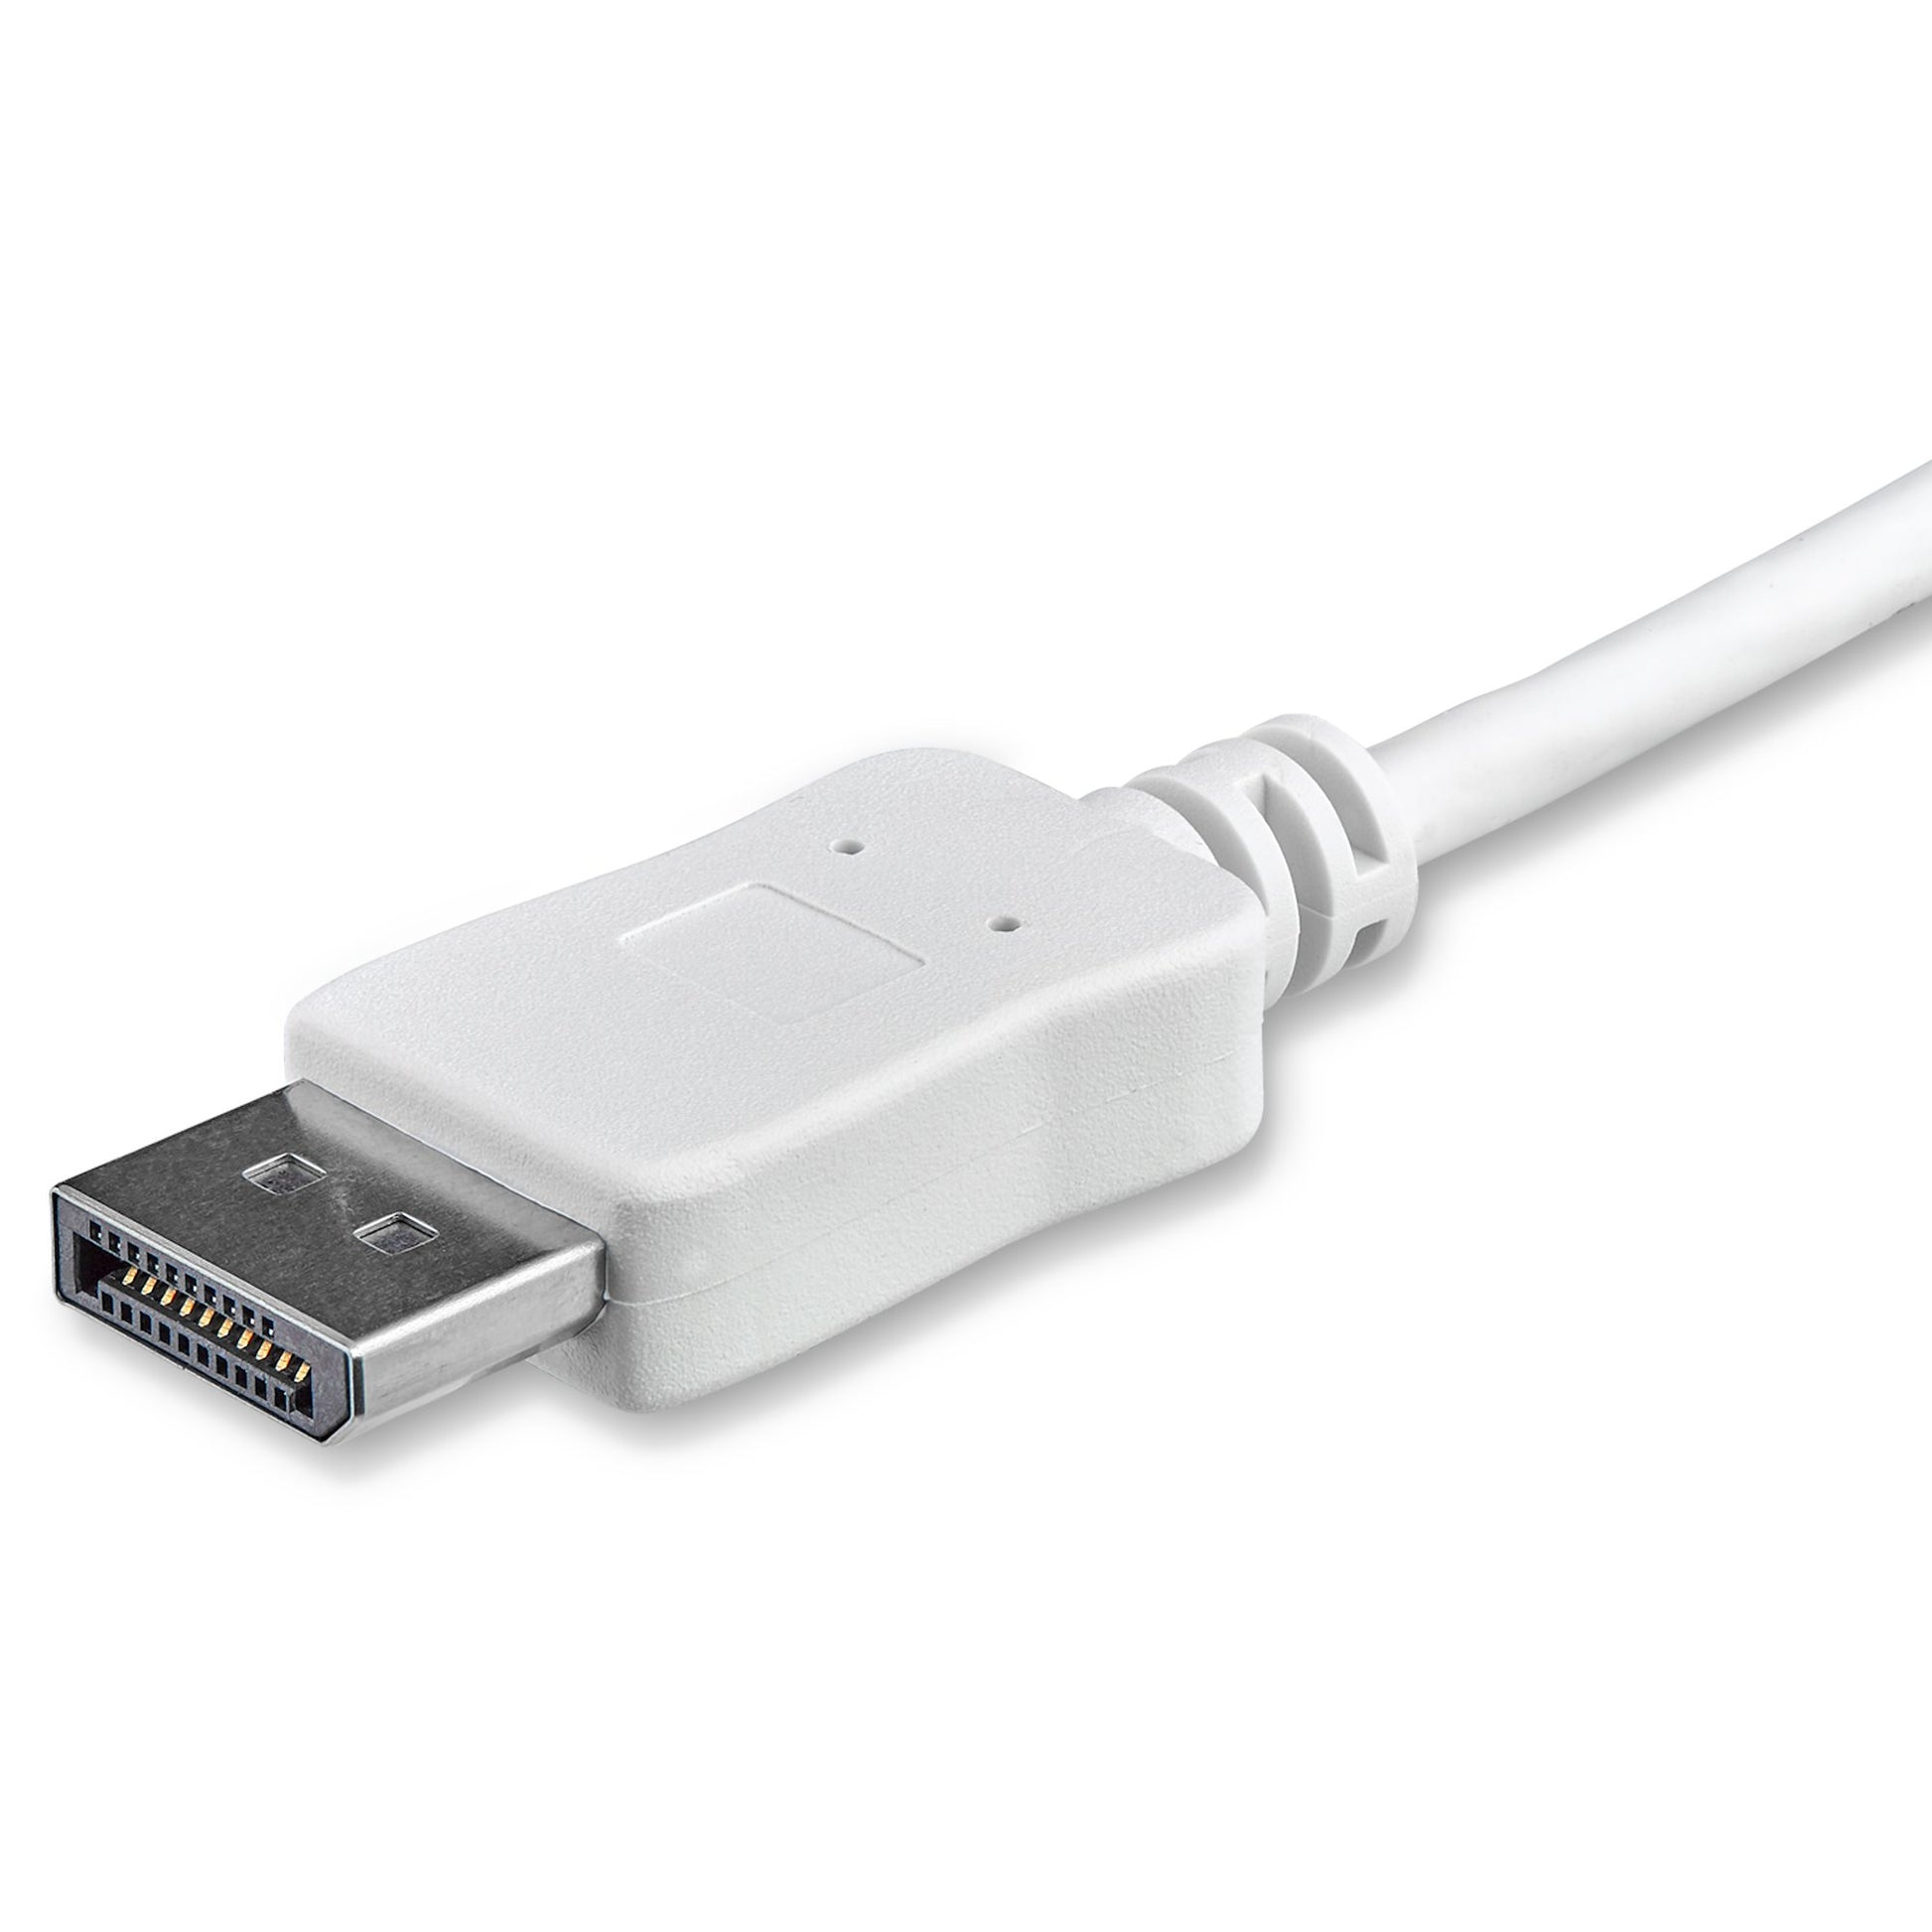 StarTech.com 3ft/1m USB C to DisplayPort 1.2 Cable 4K 60Hz - USB-C to DisplayPort Adapter Cable HBR2 - USB Type-C DP Alt Mode to DP Monitor Video Cable - Works w/ Thunderbolt 3 - White-1